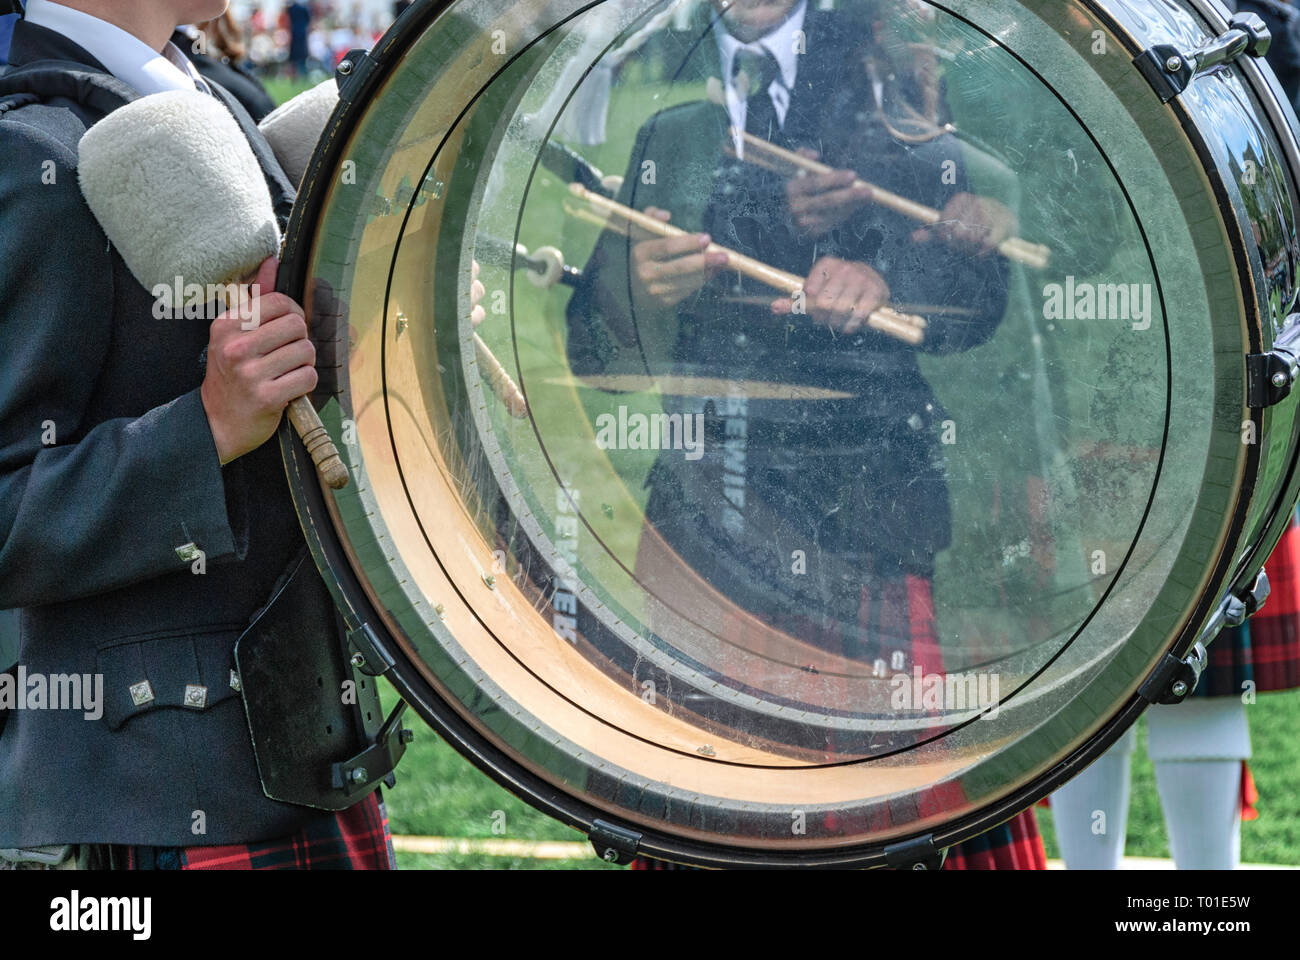 Pipes and Drums ou pipe band Banque D'Images